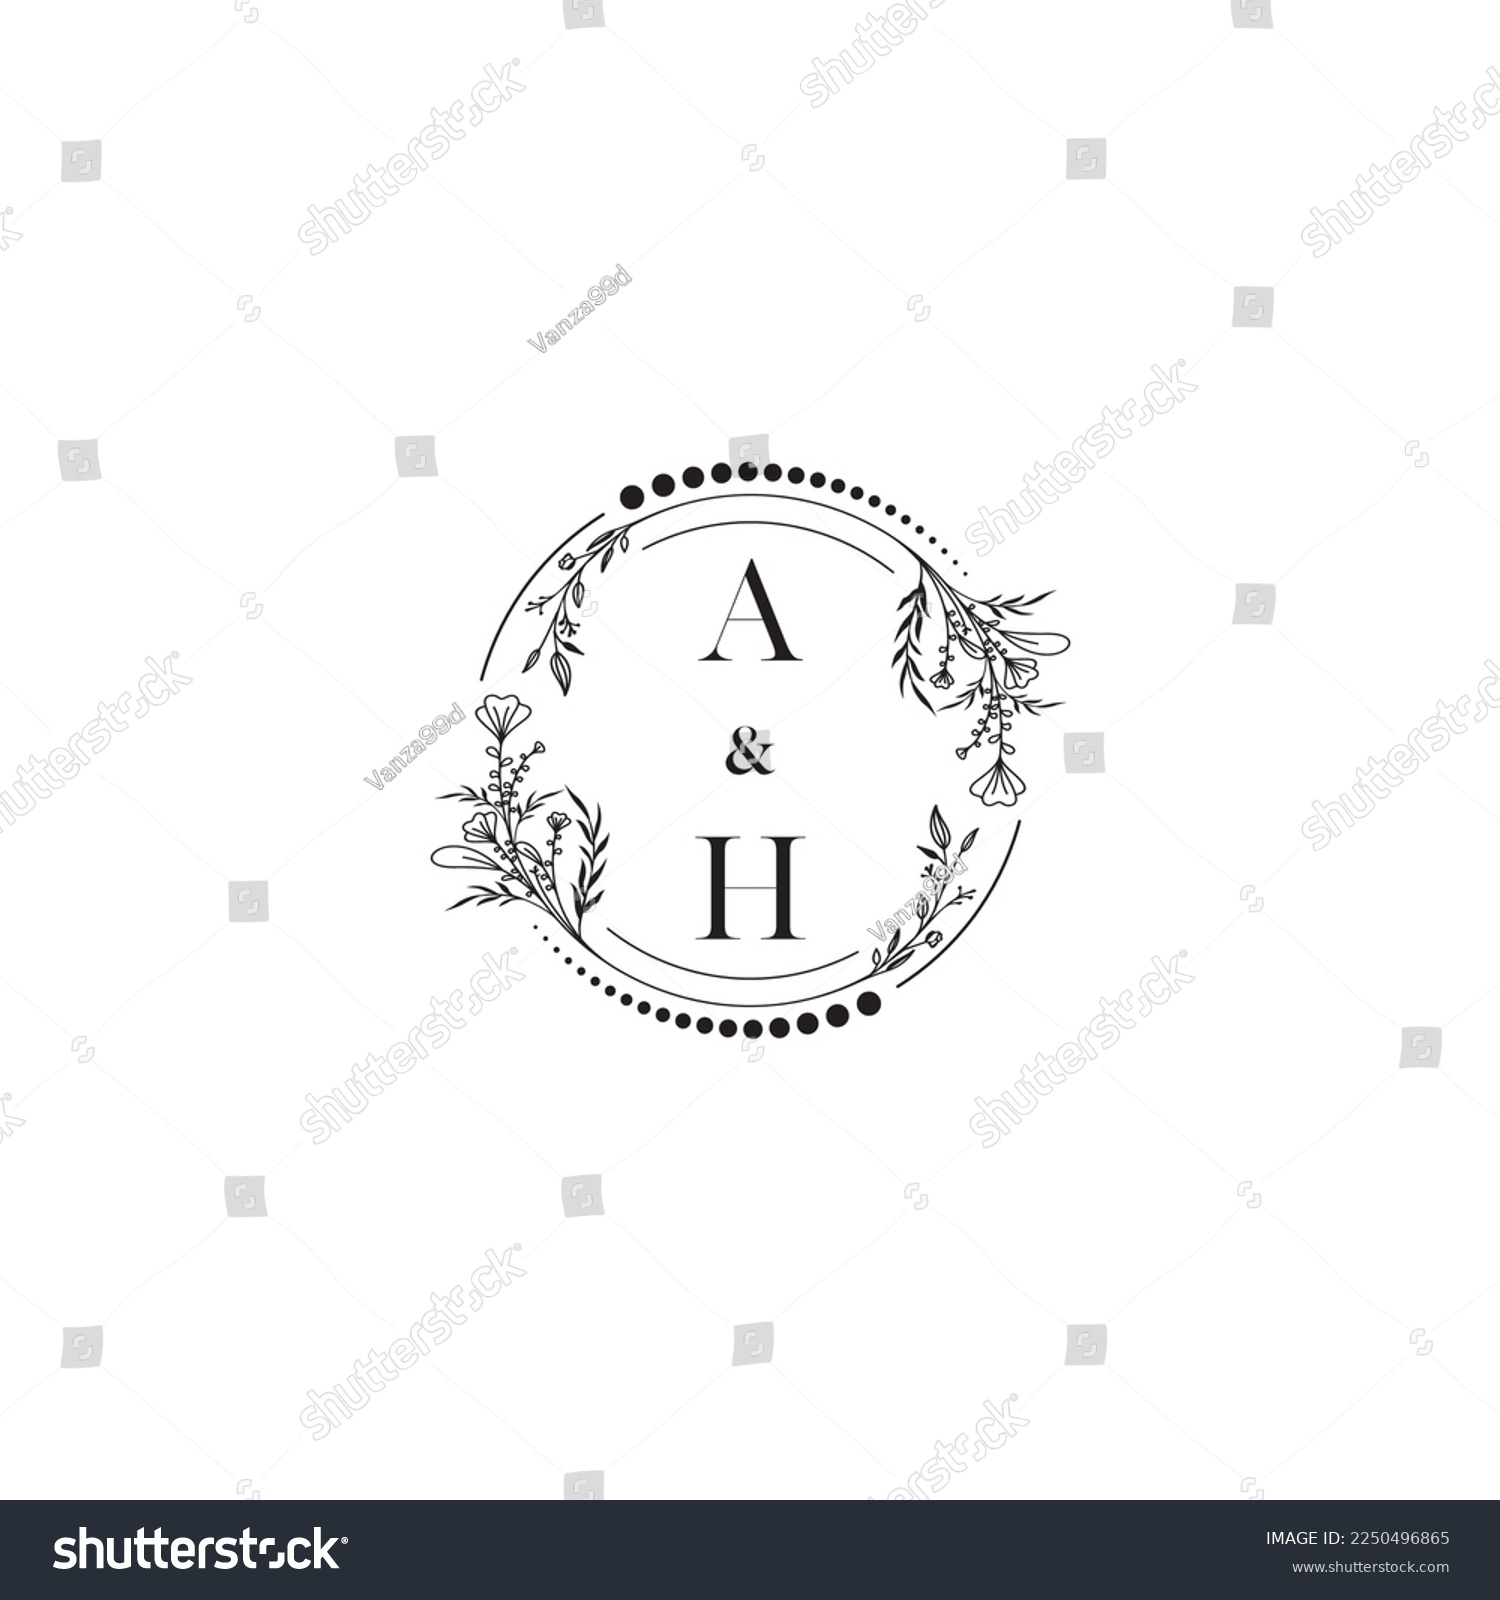 SVG of AH wedding concept in high quality professional design that will print well across any print media svg